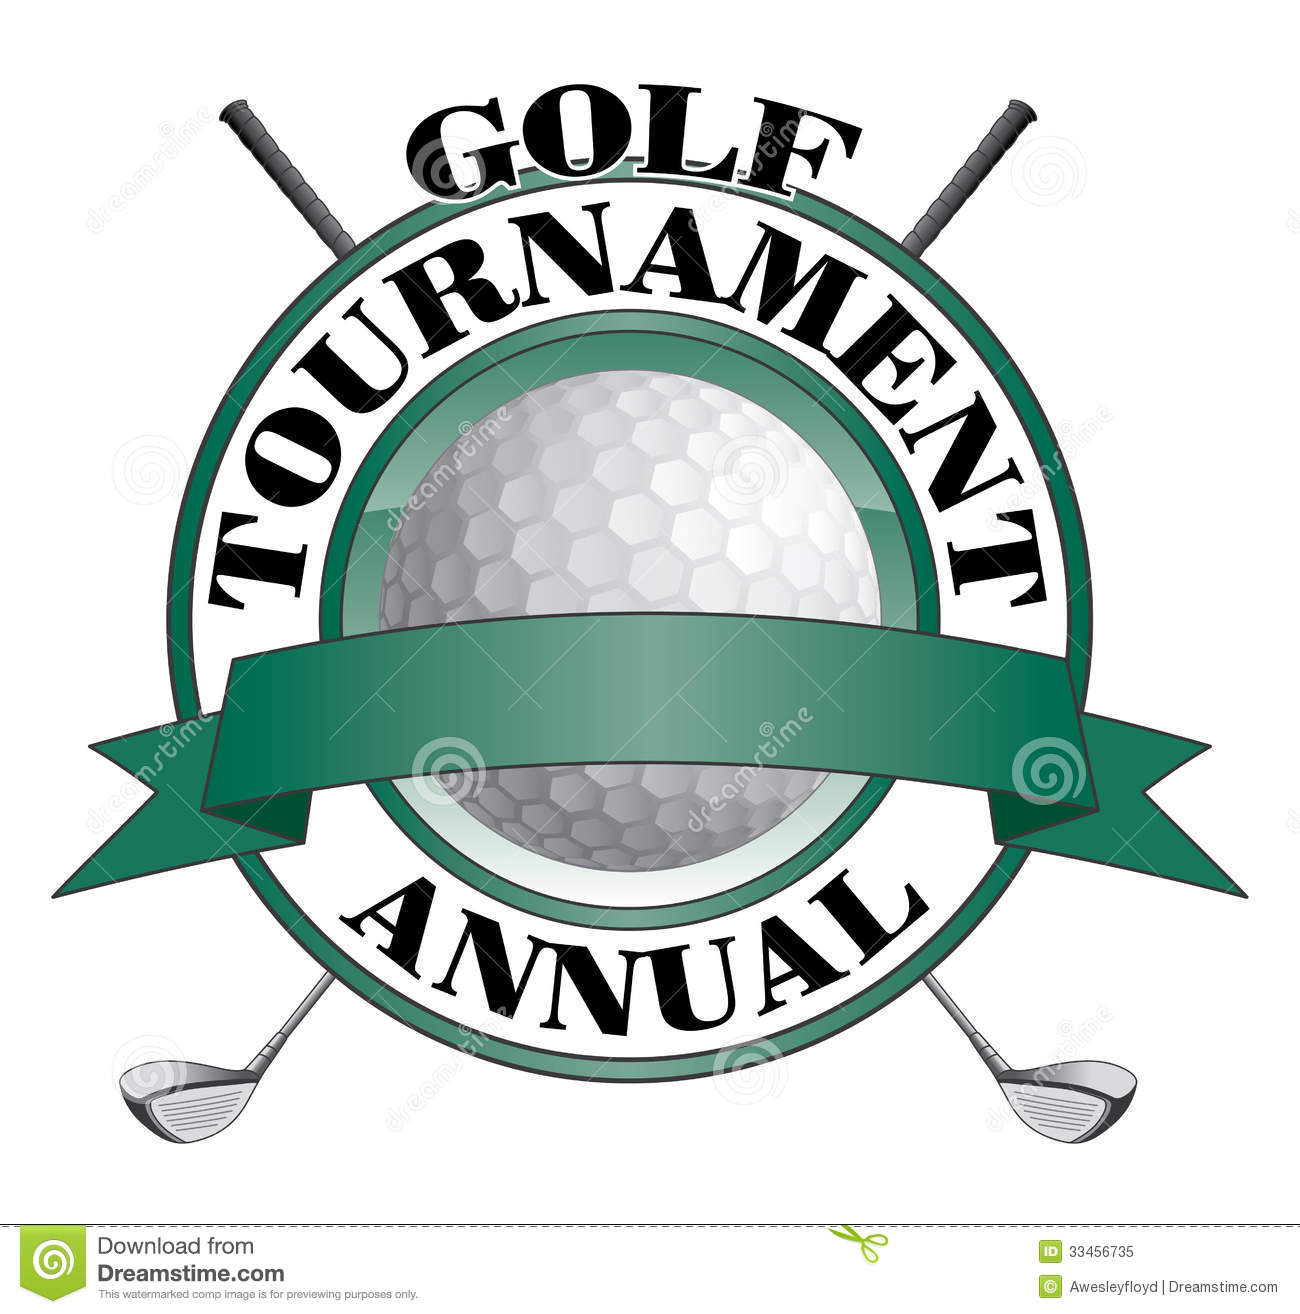 Of An Annual Golf Tournament Design  Contains Golf Clubs And Golf